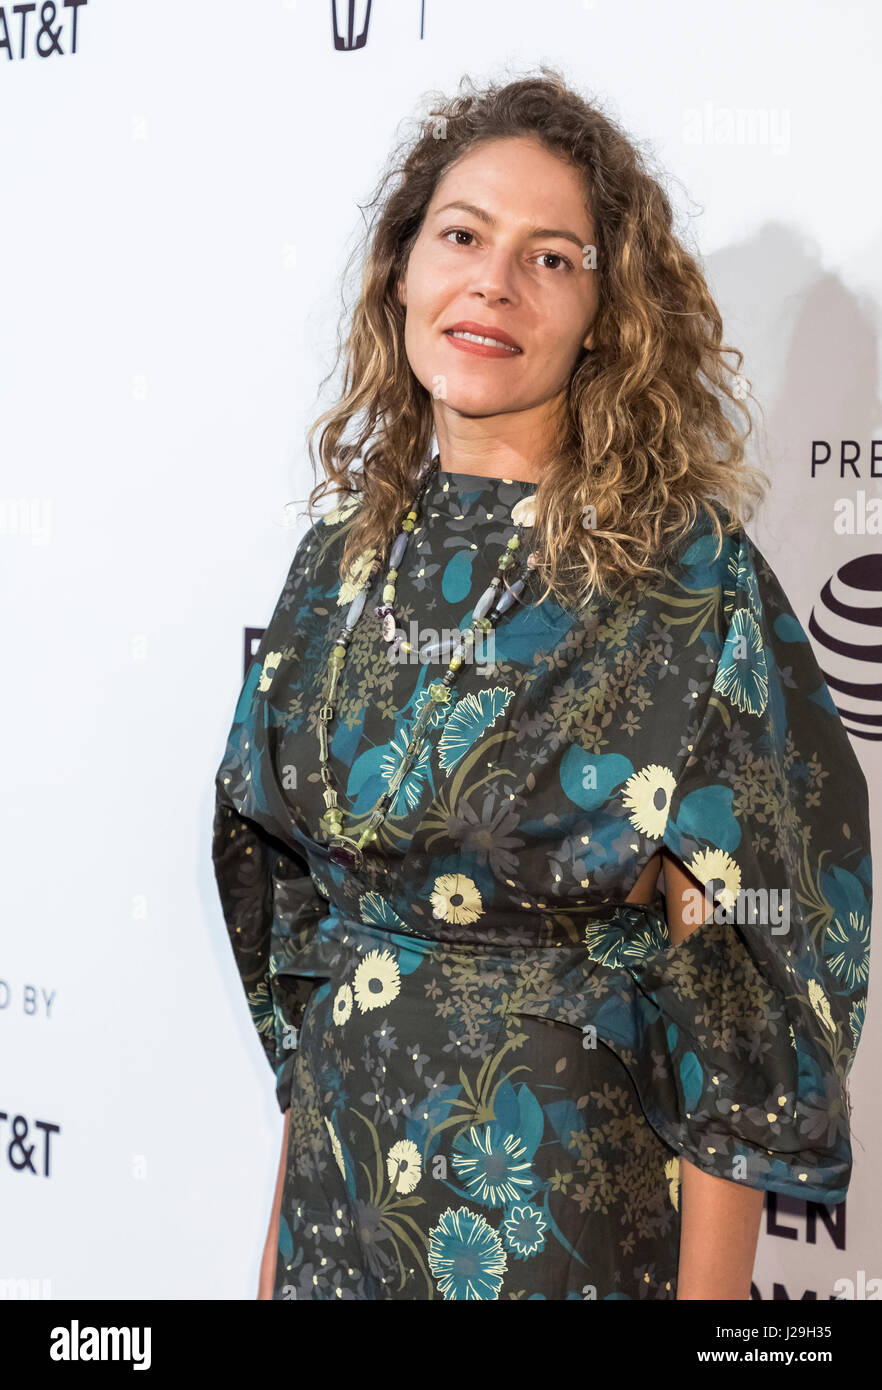 Lola Schnabel attends World Premiere of ‘HOUSE OF Z’ during the 2017 Tribeca Film Festival at SVA Theatre, Manhattan. (Photo by: Sam Aronov / Pacific Press) Stock Photo